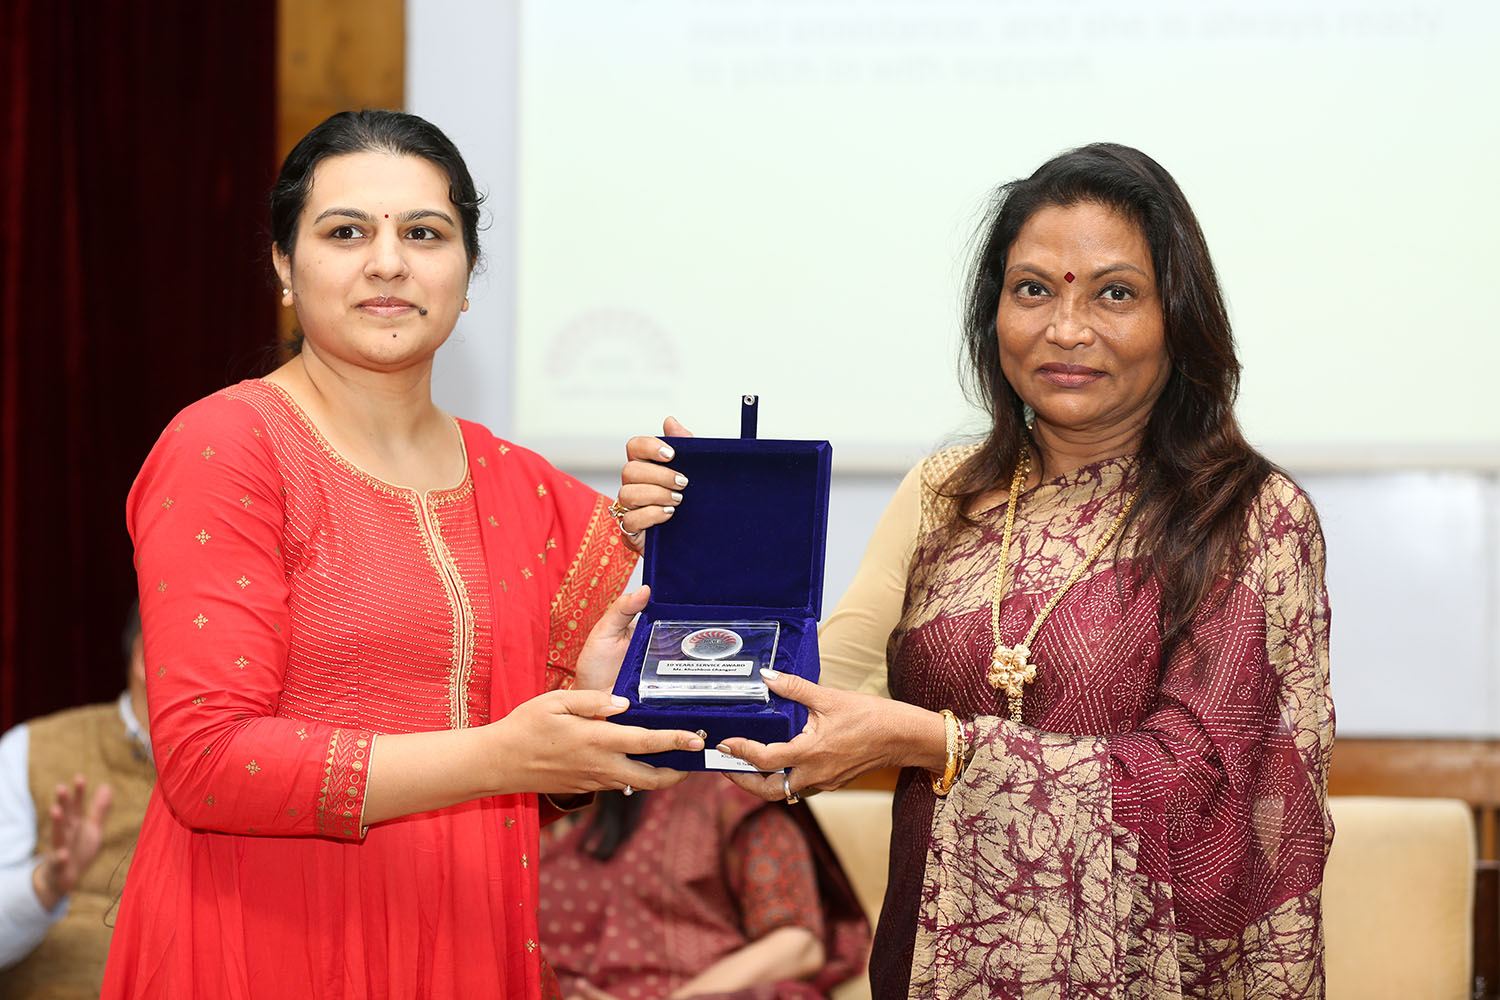 Ms Khushboo Chhangani, Coordinator, Office of Disability Services, receives the award for 10 years of service from Ms. Kalpana Saroj, Member of the Board of Governors, IIMB, during the institute’s 49th Foundation Day celebrations.